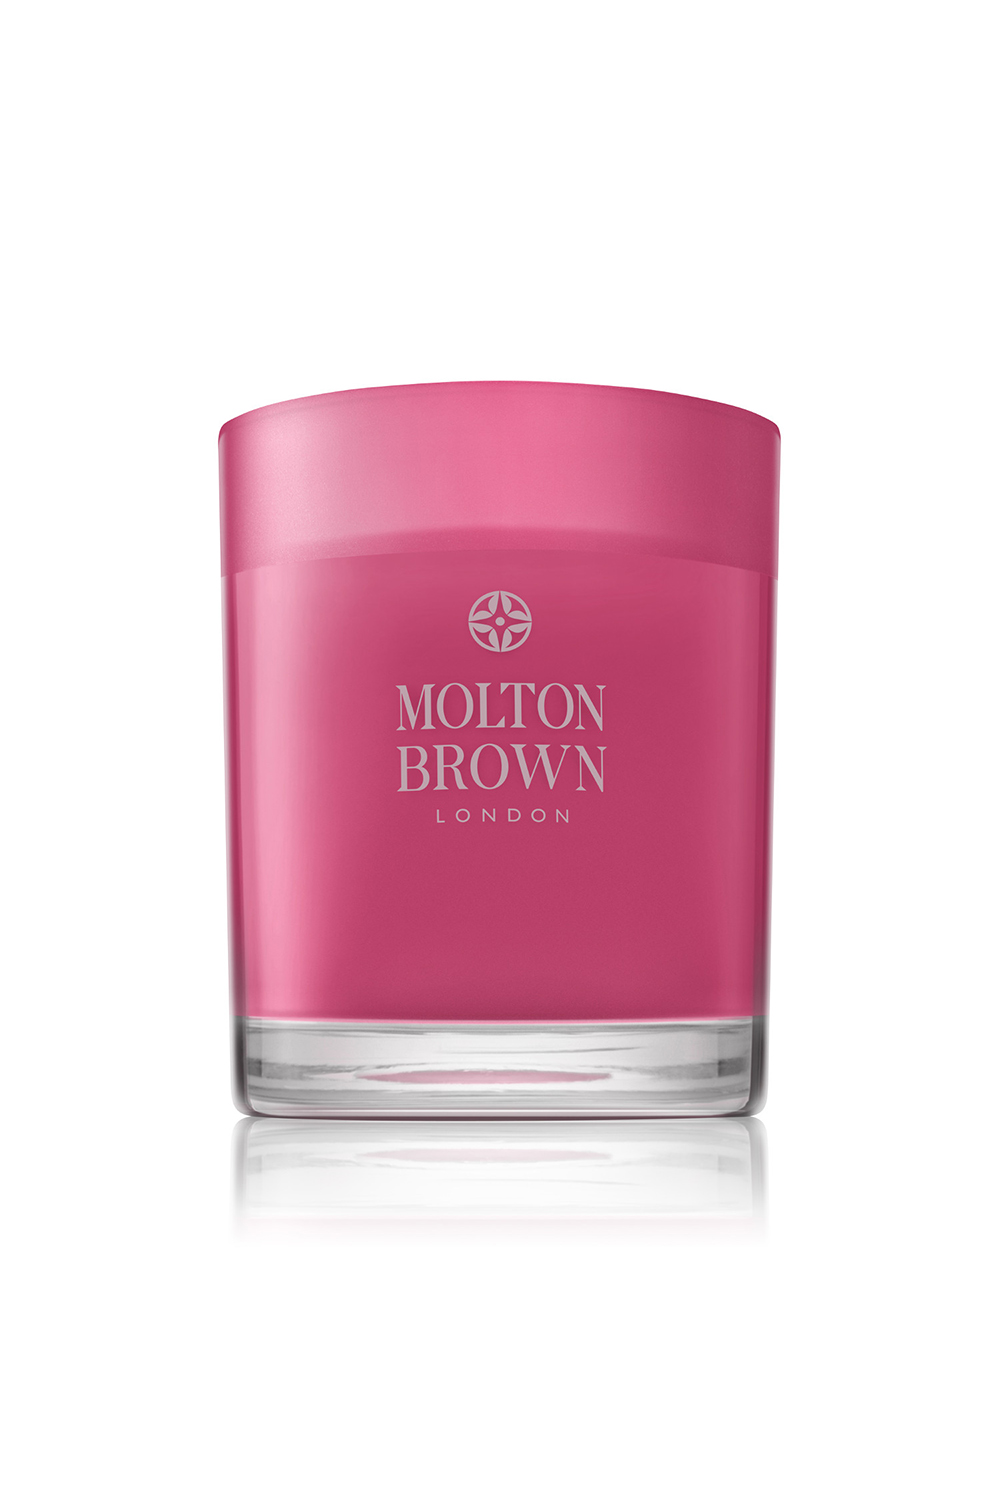 MOLTON BROWN – Κερι Pink Pepperpod Single Wick- 180g